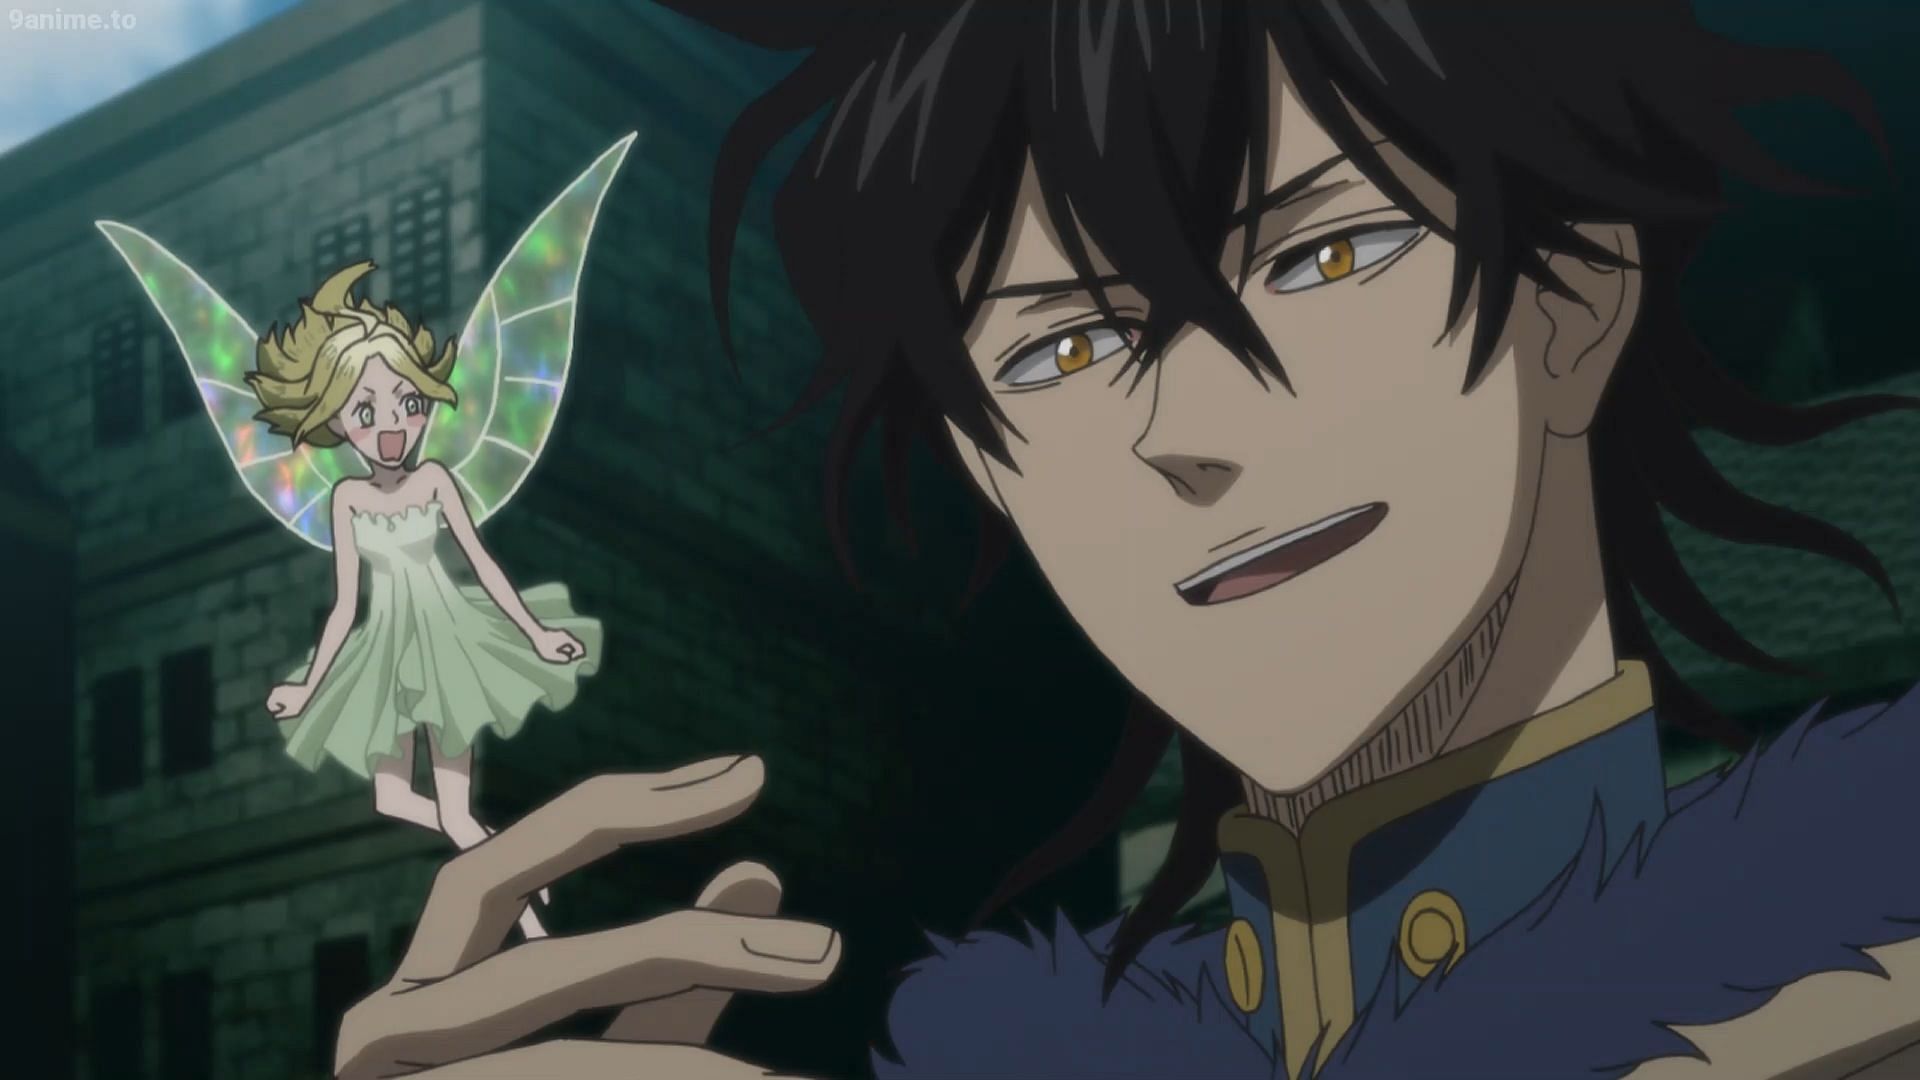 Yuno (right) seen with his wind spirit Sylph (left) in the Black Clover anime (Image via Studio Pierrot)